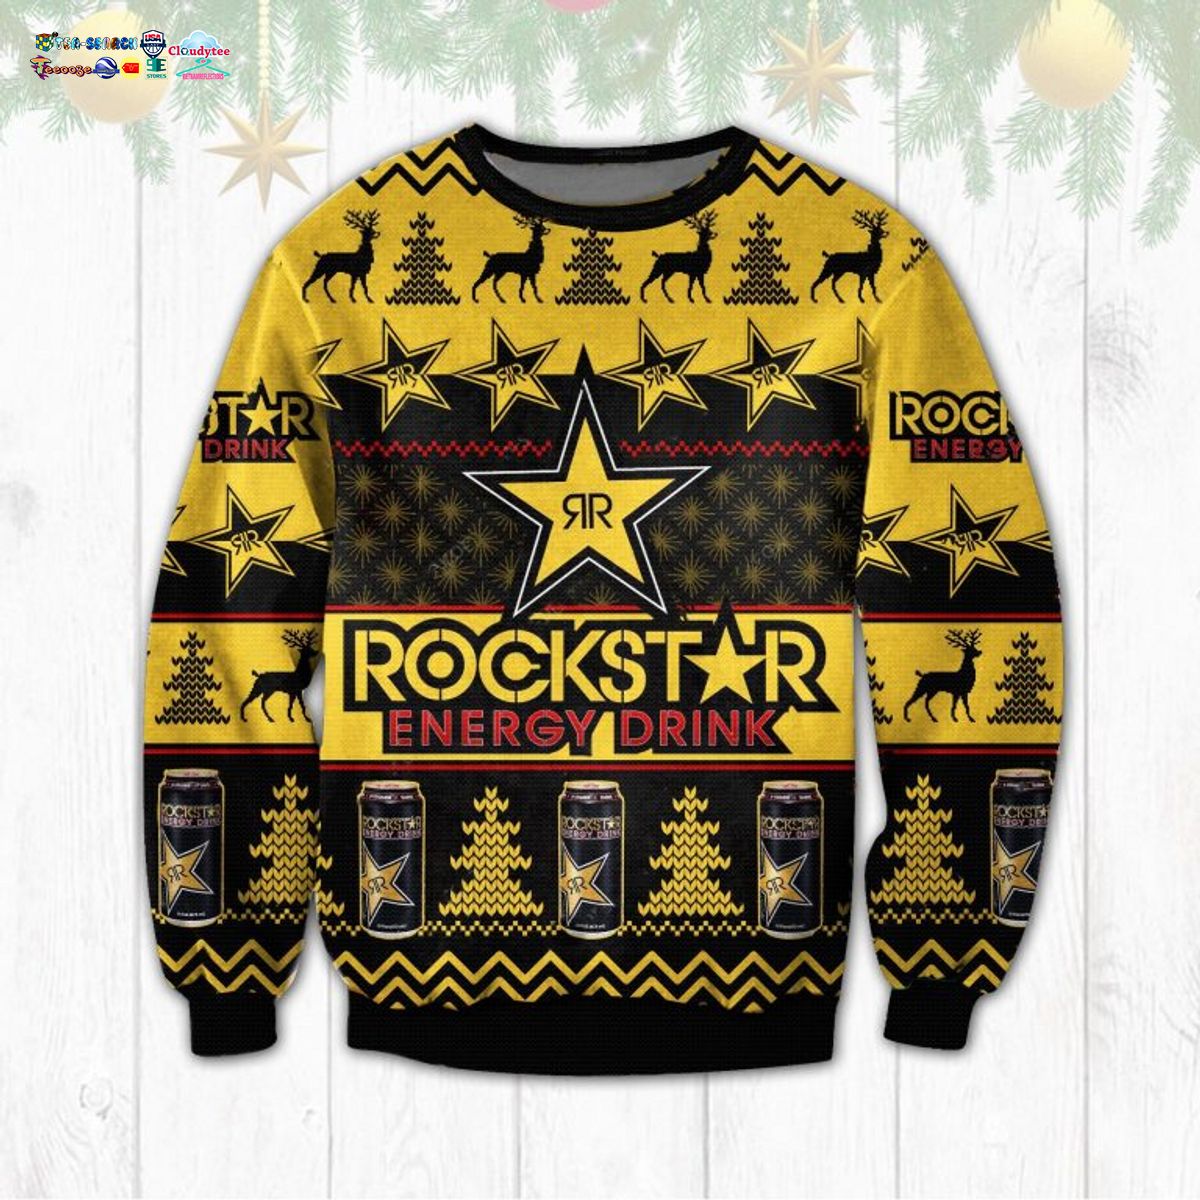 Rockstar Ugly Christmas Sweater - Nice place and nice picture